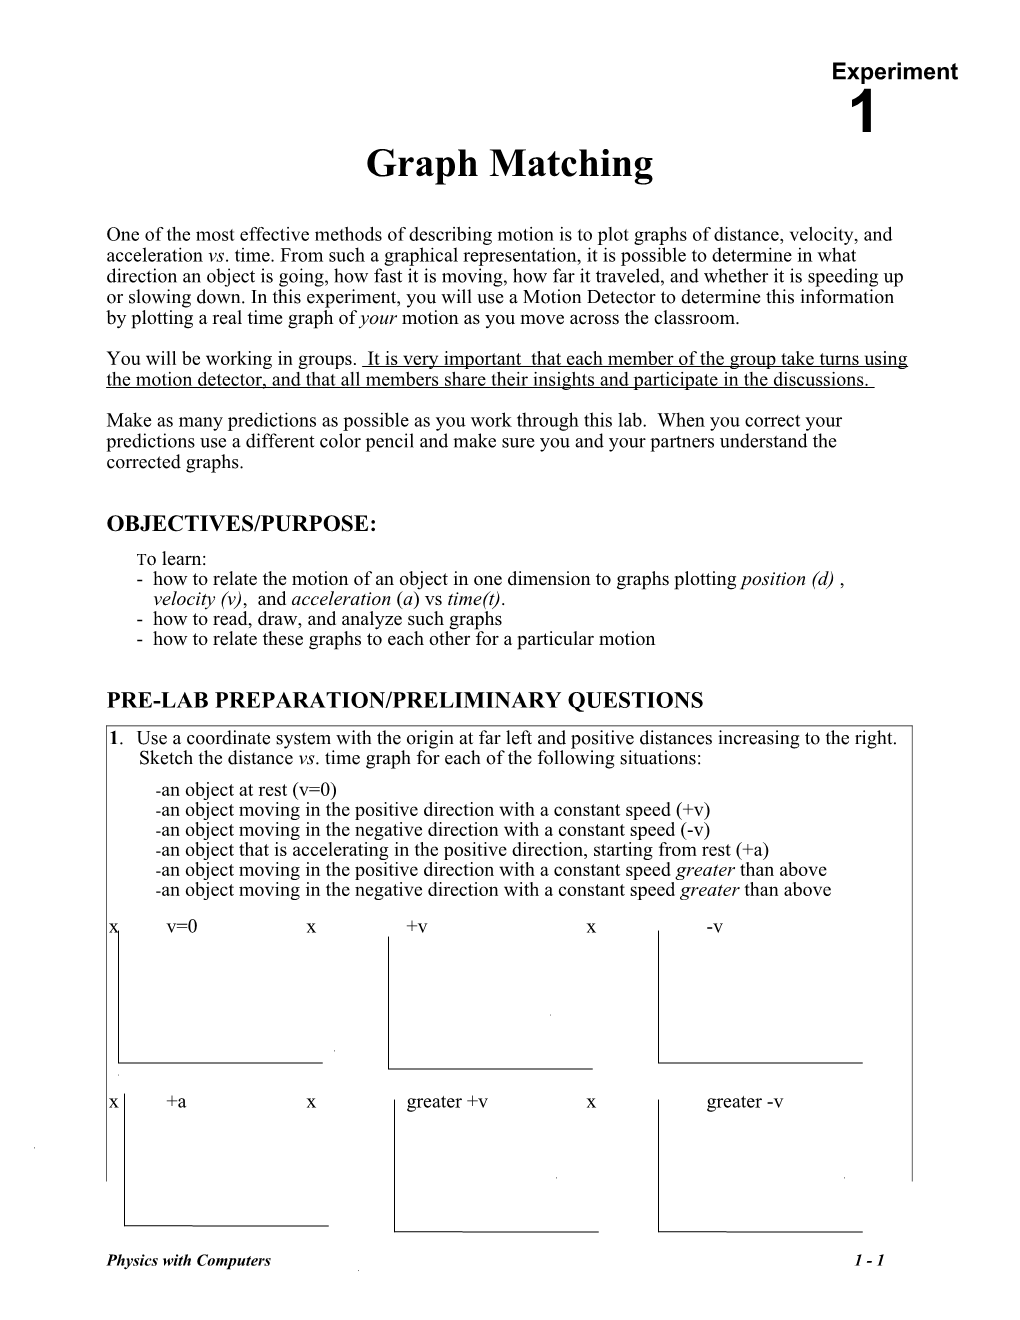 Phys 21 Graph Matching and Motion